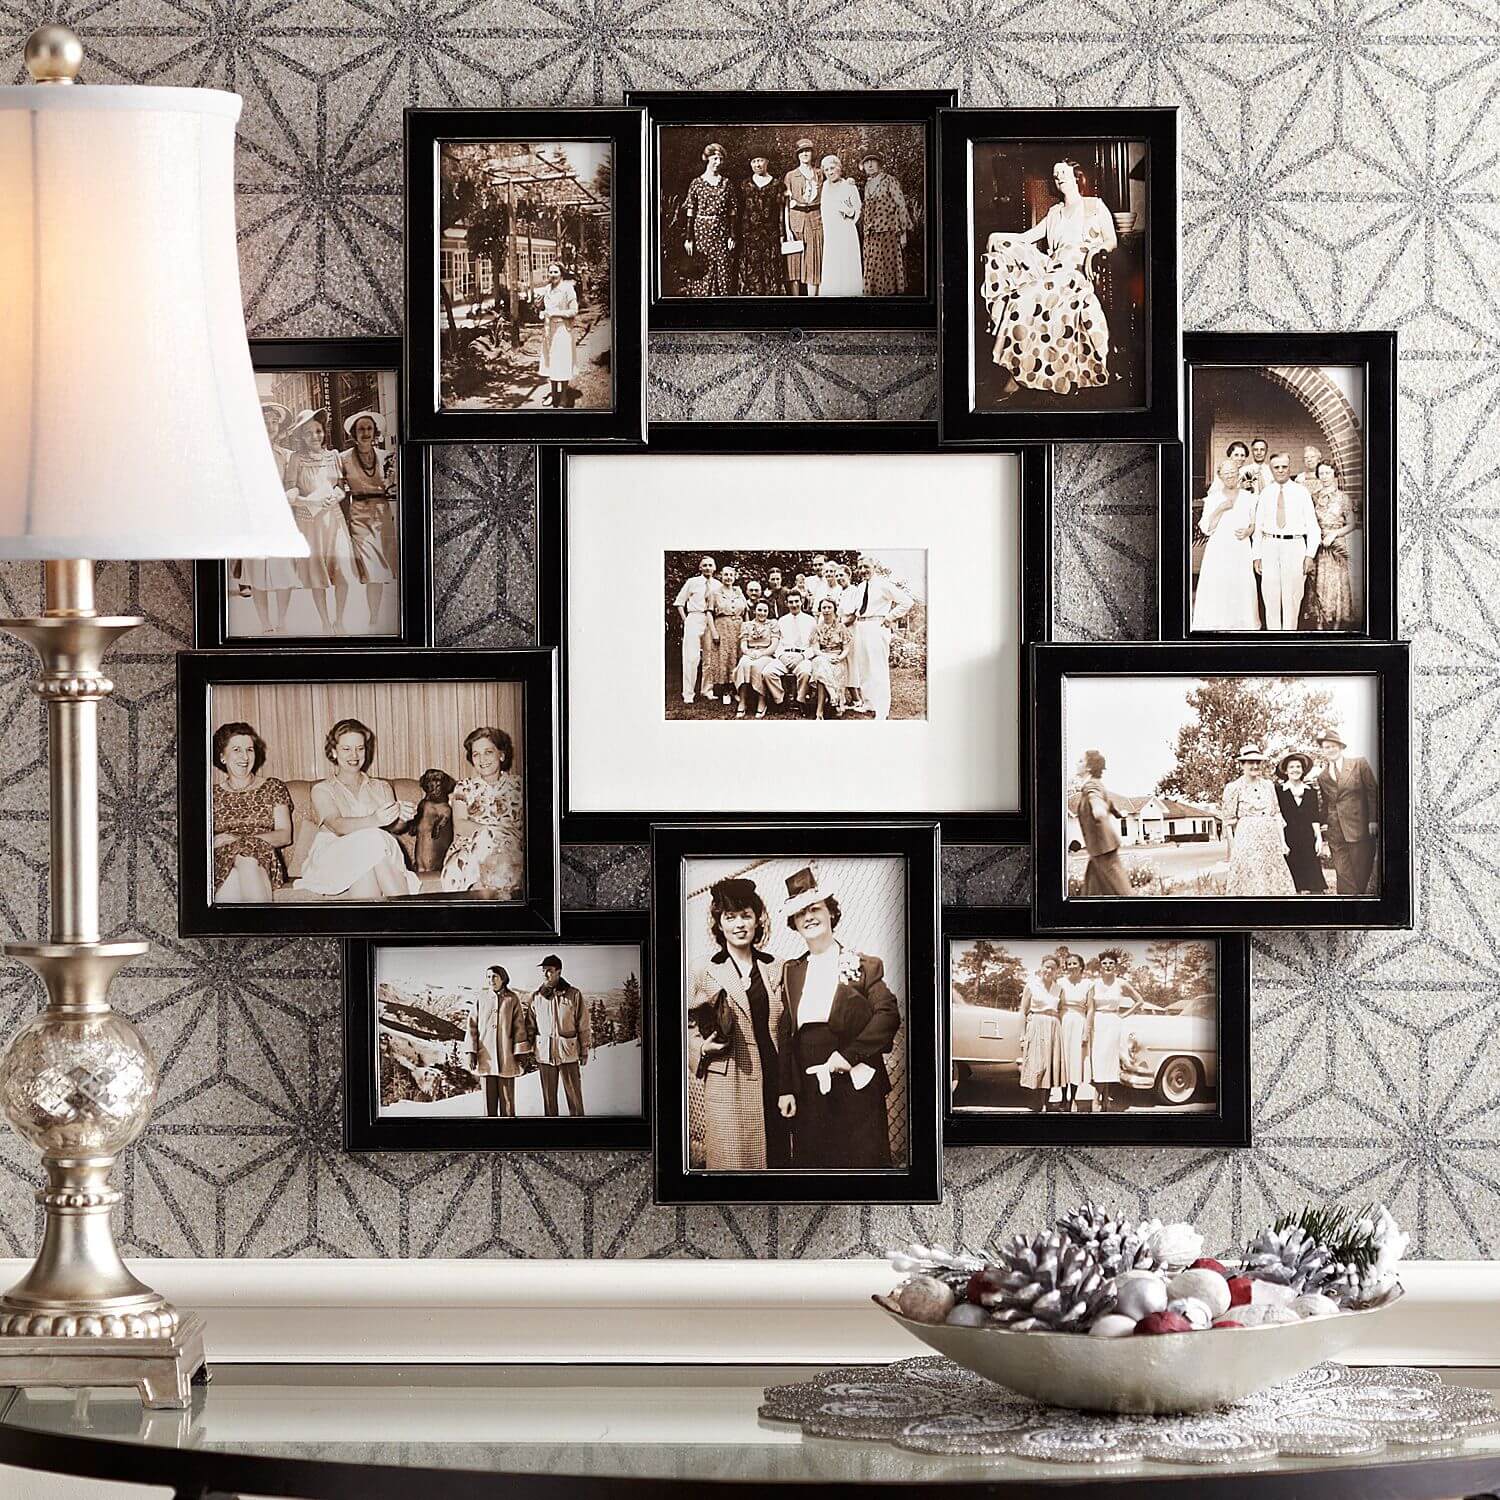 Customized Wall Art or a Framed Photo Collage